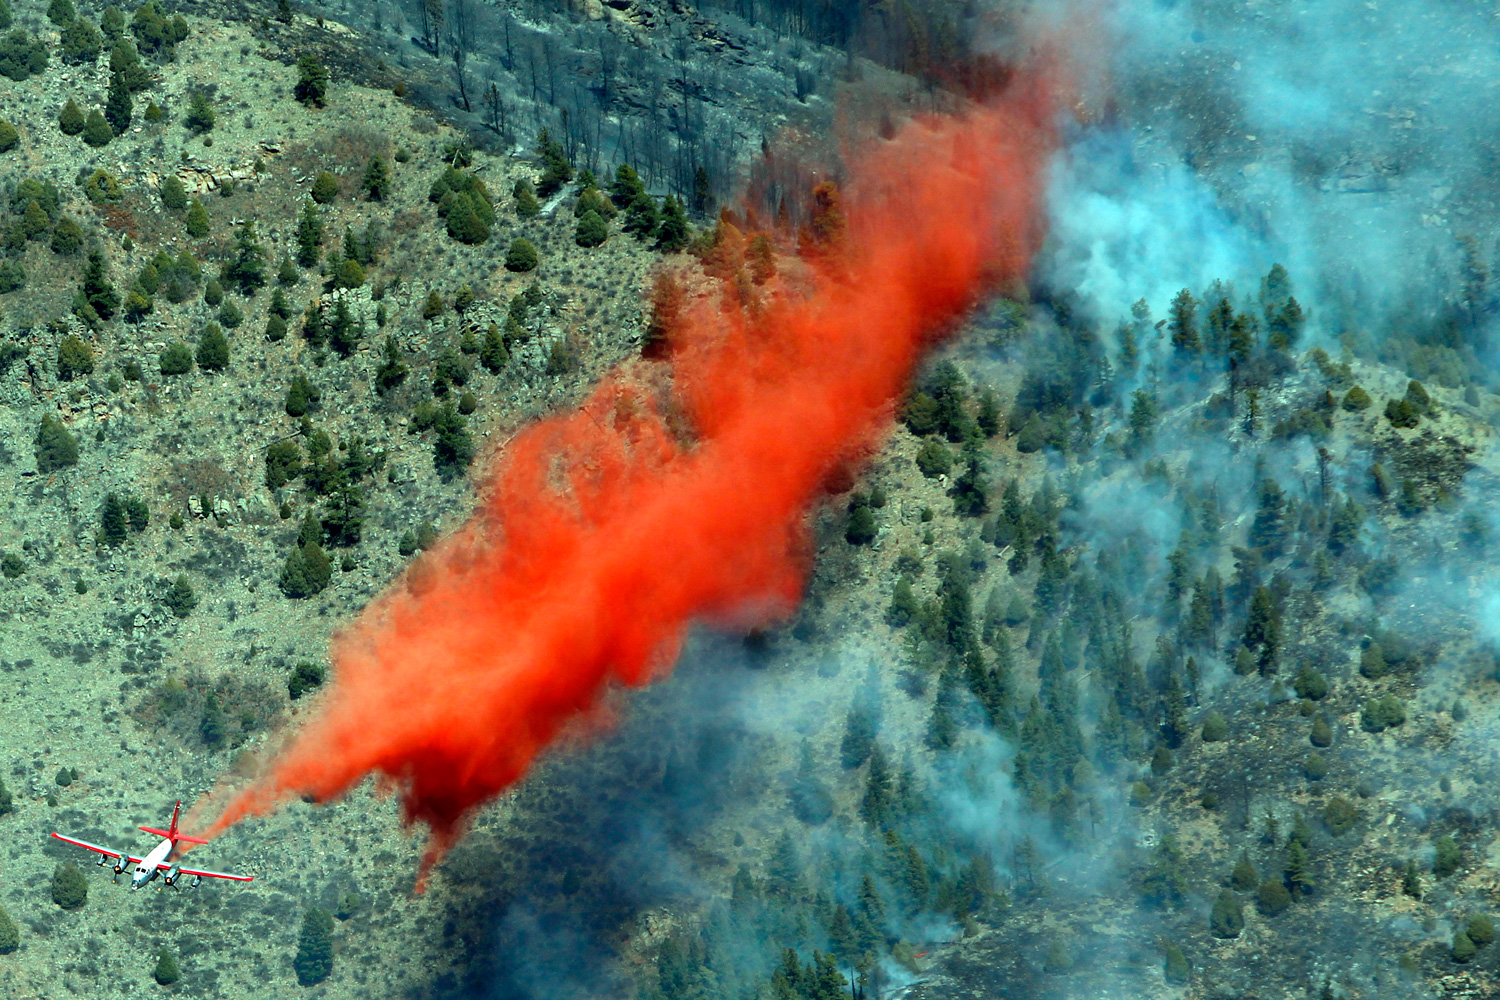 March 27, 2012. A trail of slurry is deposited by a bomber during a run over a smoldering ridge in the Lower North Fork Wildfire burning in the foothills community of Conifer, Colo.